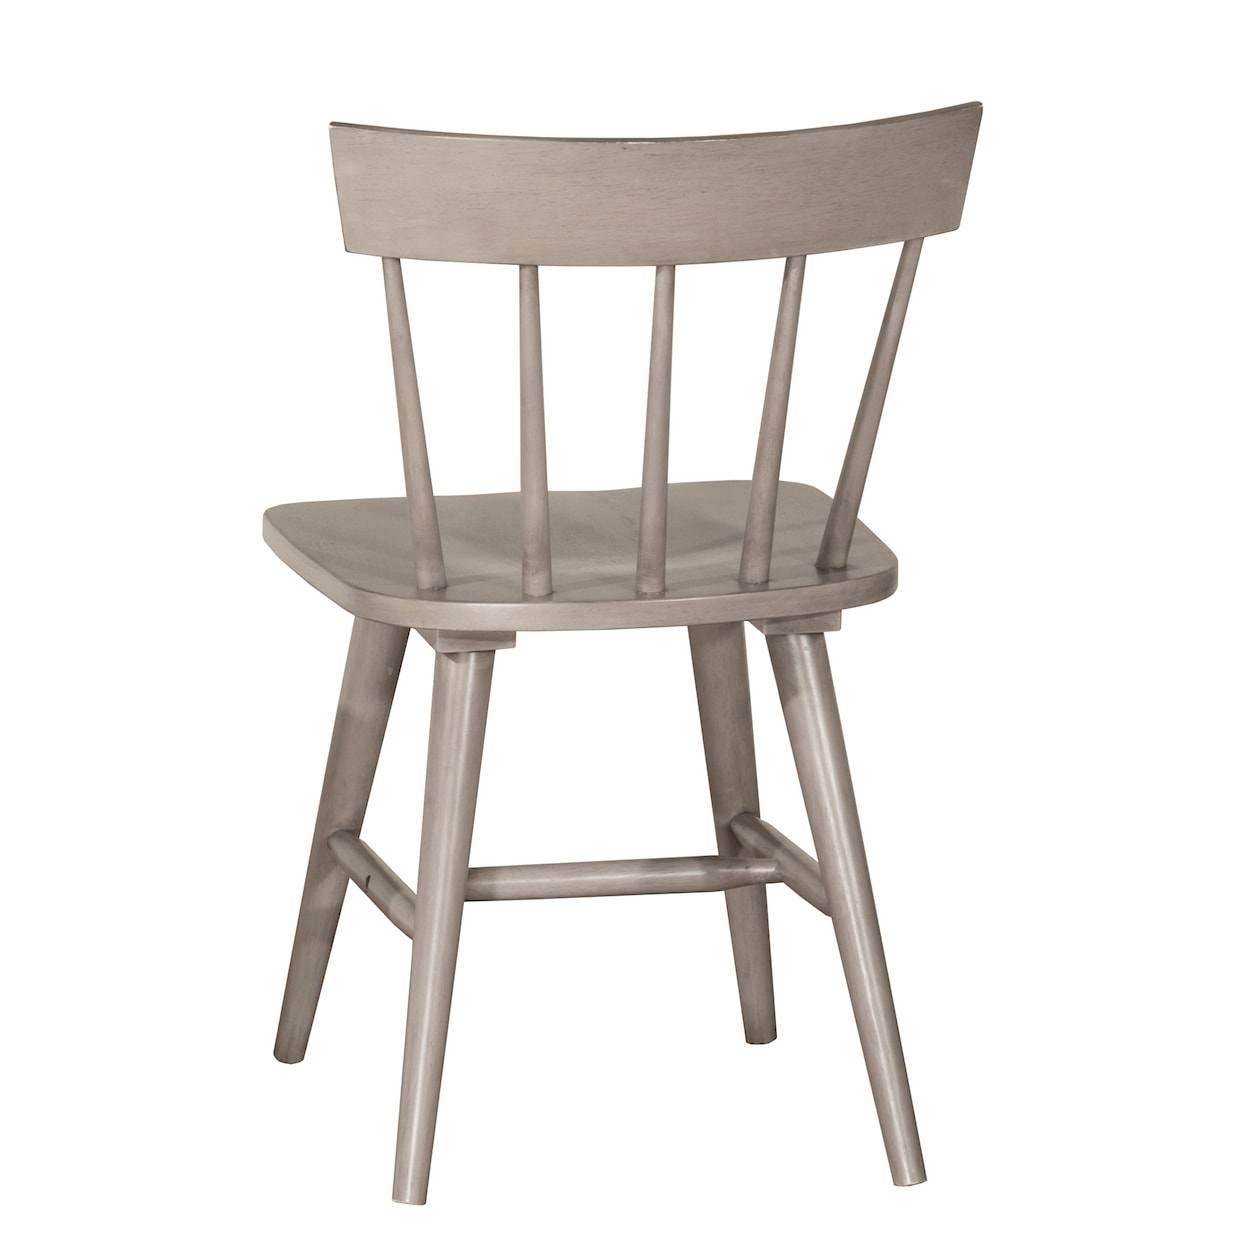 Hillsdale Mayson Dining Chair